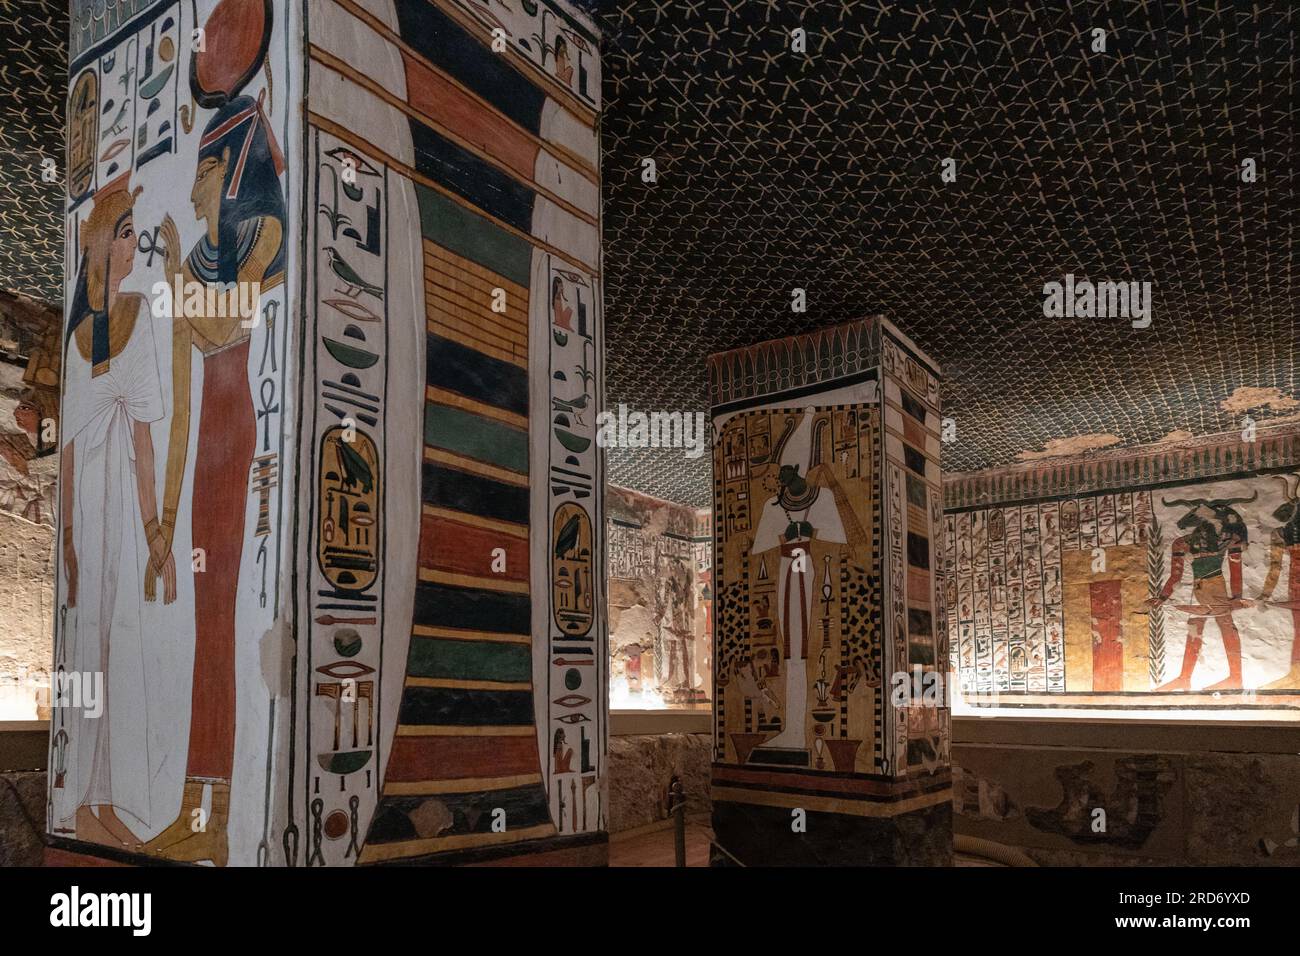 Details of the wall paintings inside Nefertari's tomb at the Valley of the Queens, Luxor. Stock Photo